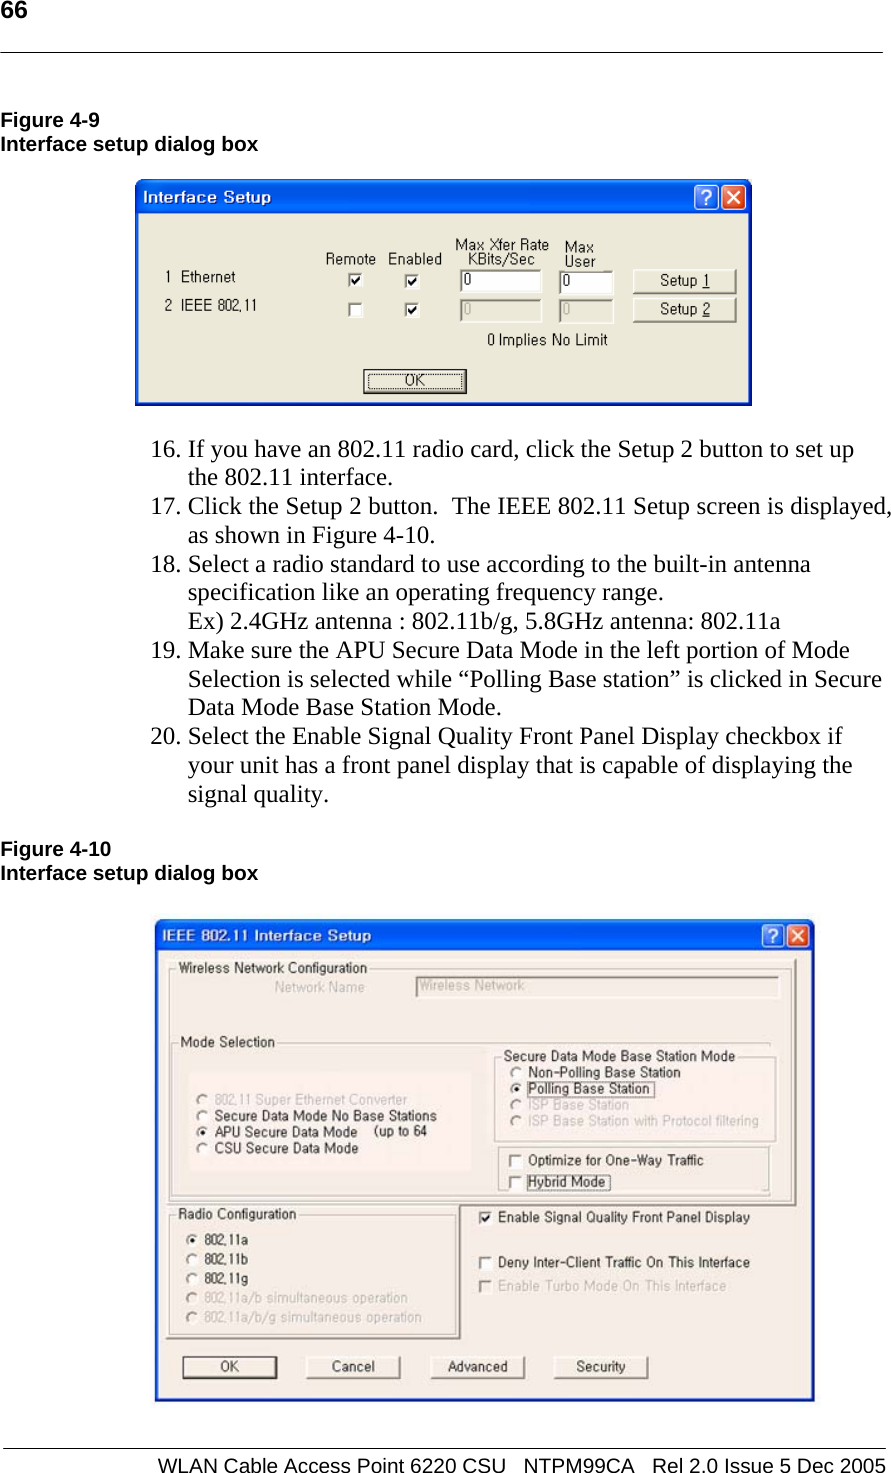   66  WLAN Cable Access Point 6220 CSU   NTPM99CA   Rel 2.0 Issue 5 Dec 2005 Figure 4-9 Interface setup dialog box    16. If you have an 802.11 radio card, click the Setup 2 button to set up the 802.11 interface. 17. Click the Setup 2 button.  The IEEE 802.11 Setup screen is displayed, as shown in Figure 4-10.  18. Select a radio standard to use according to the built-in antenna specification like an operating frequency range.  Ex) 2.4GHz antenna : 802.11b/g, 5.8GHz antenna: 802.11a  19. Make sure the APU Secure Data Mode in the left portion of Mode Selection is selected while “Polling Base station” is clicked in Secure Data Mode Base Station Mode. 20. Select the Enable Signal Quality Front Panel Display checkbox if your unit has a front panel display that is capable of displaying the signal quality.  Figure 4-10 Interface setup dialog box    